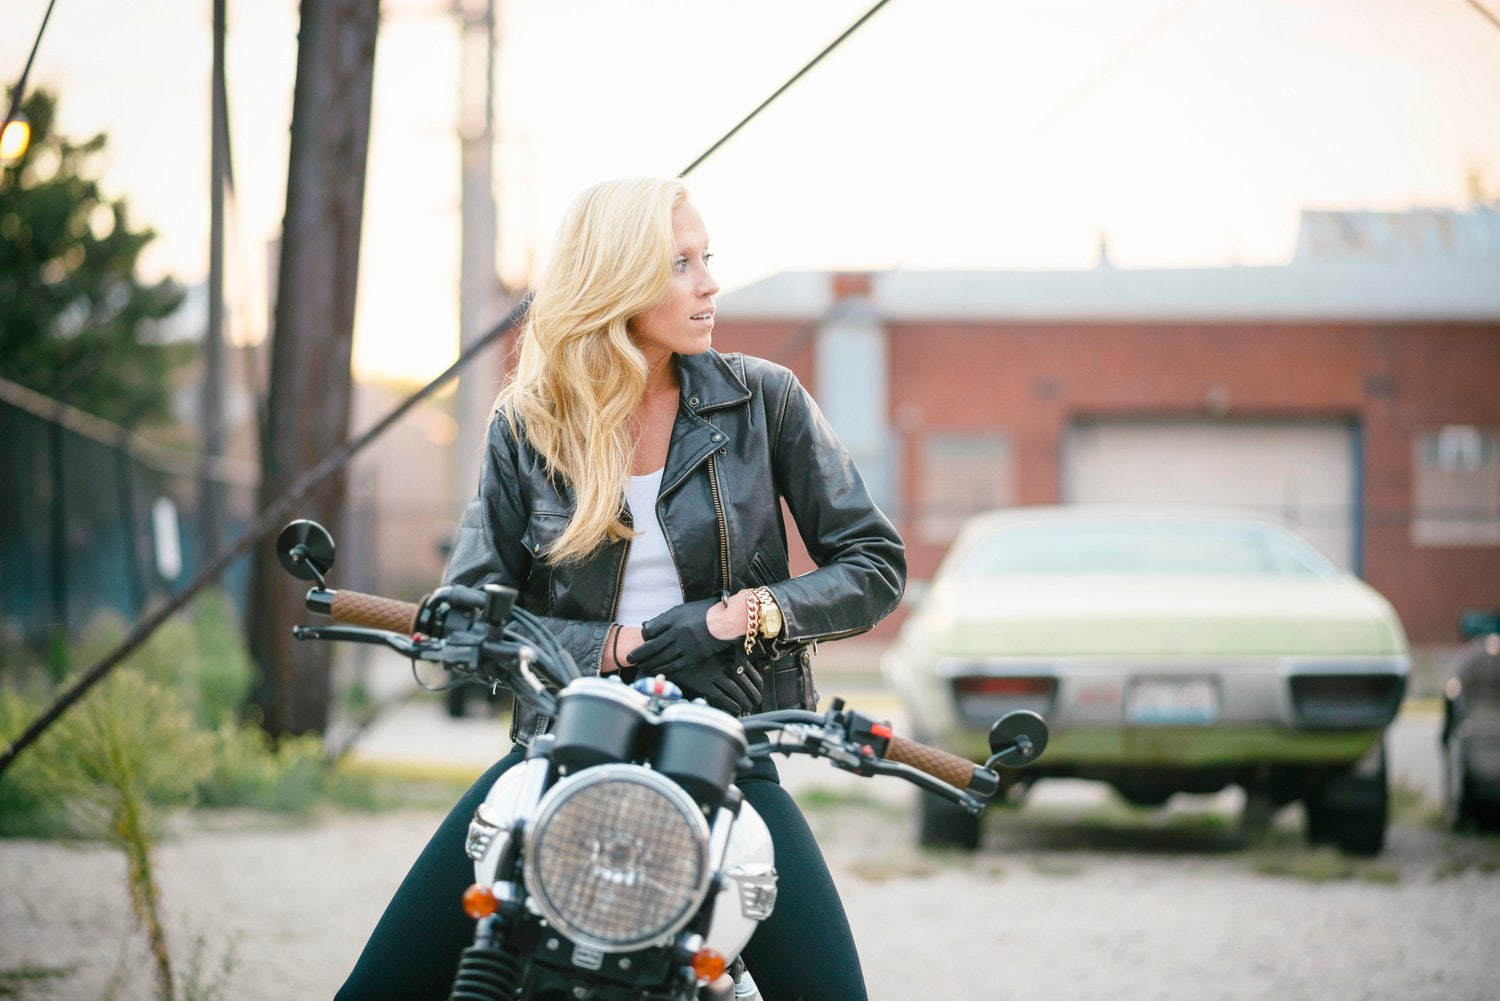 Motorcycles, Girls & Motorcycles